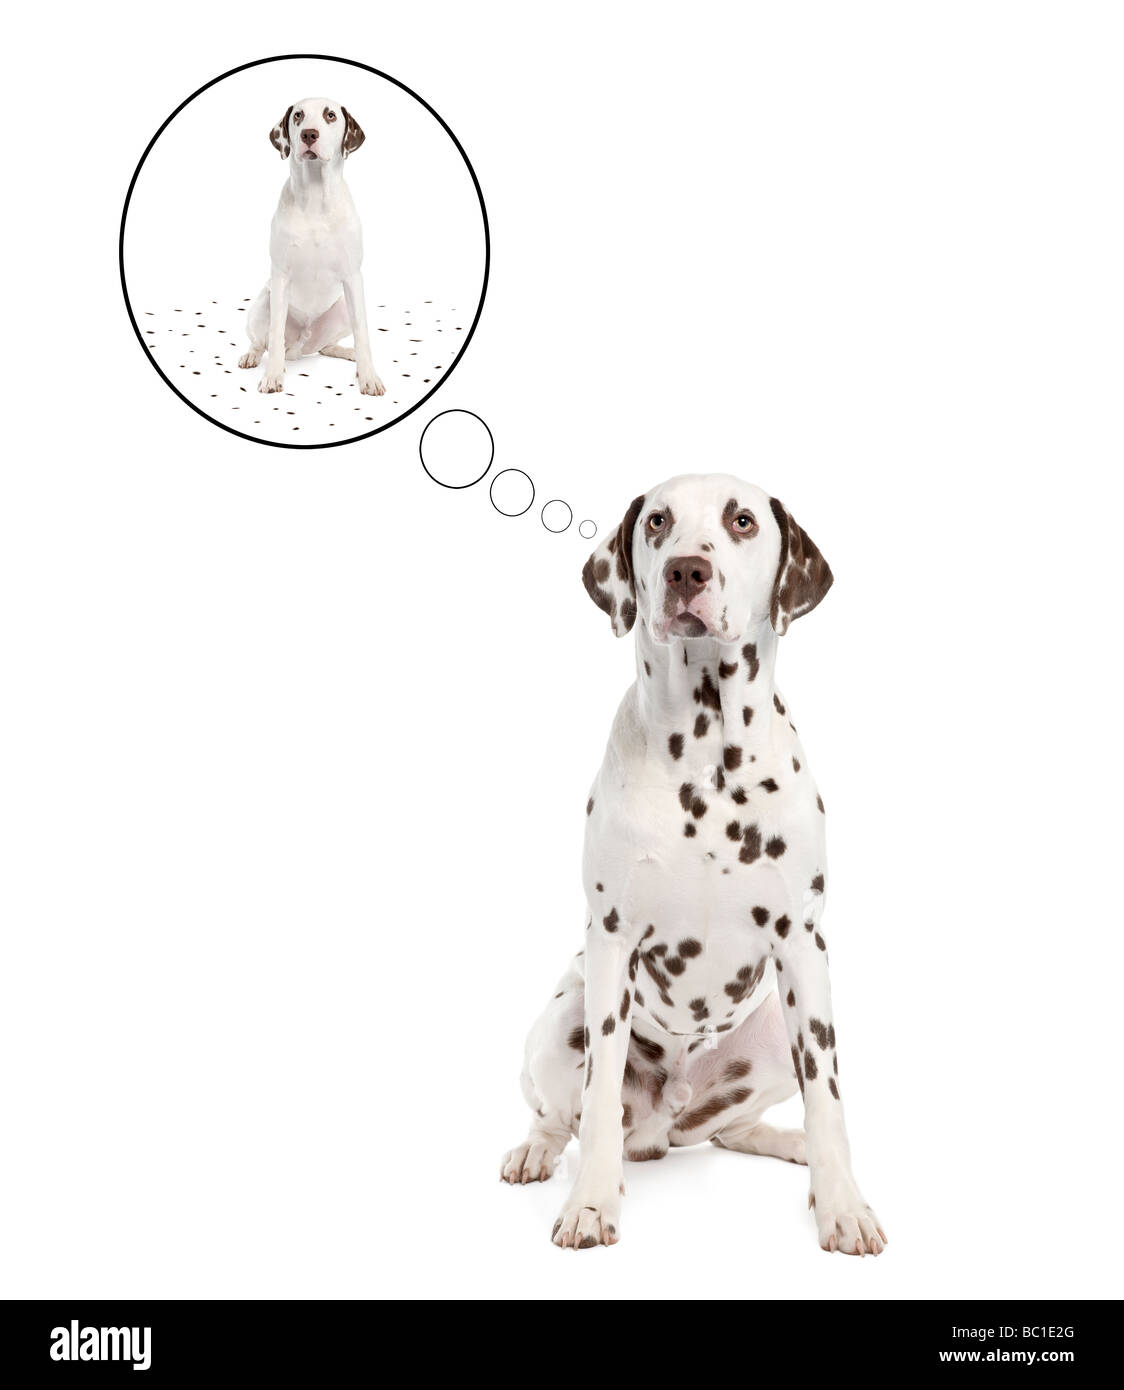 Dalmatian shedding its spots in front of a white background Stock Photo